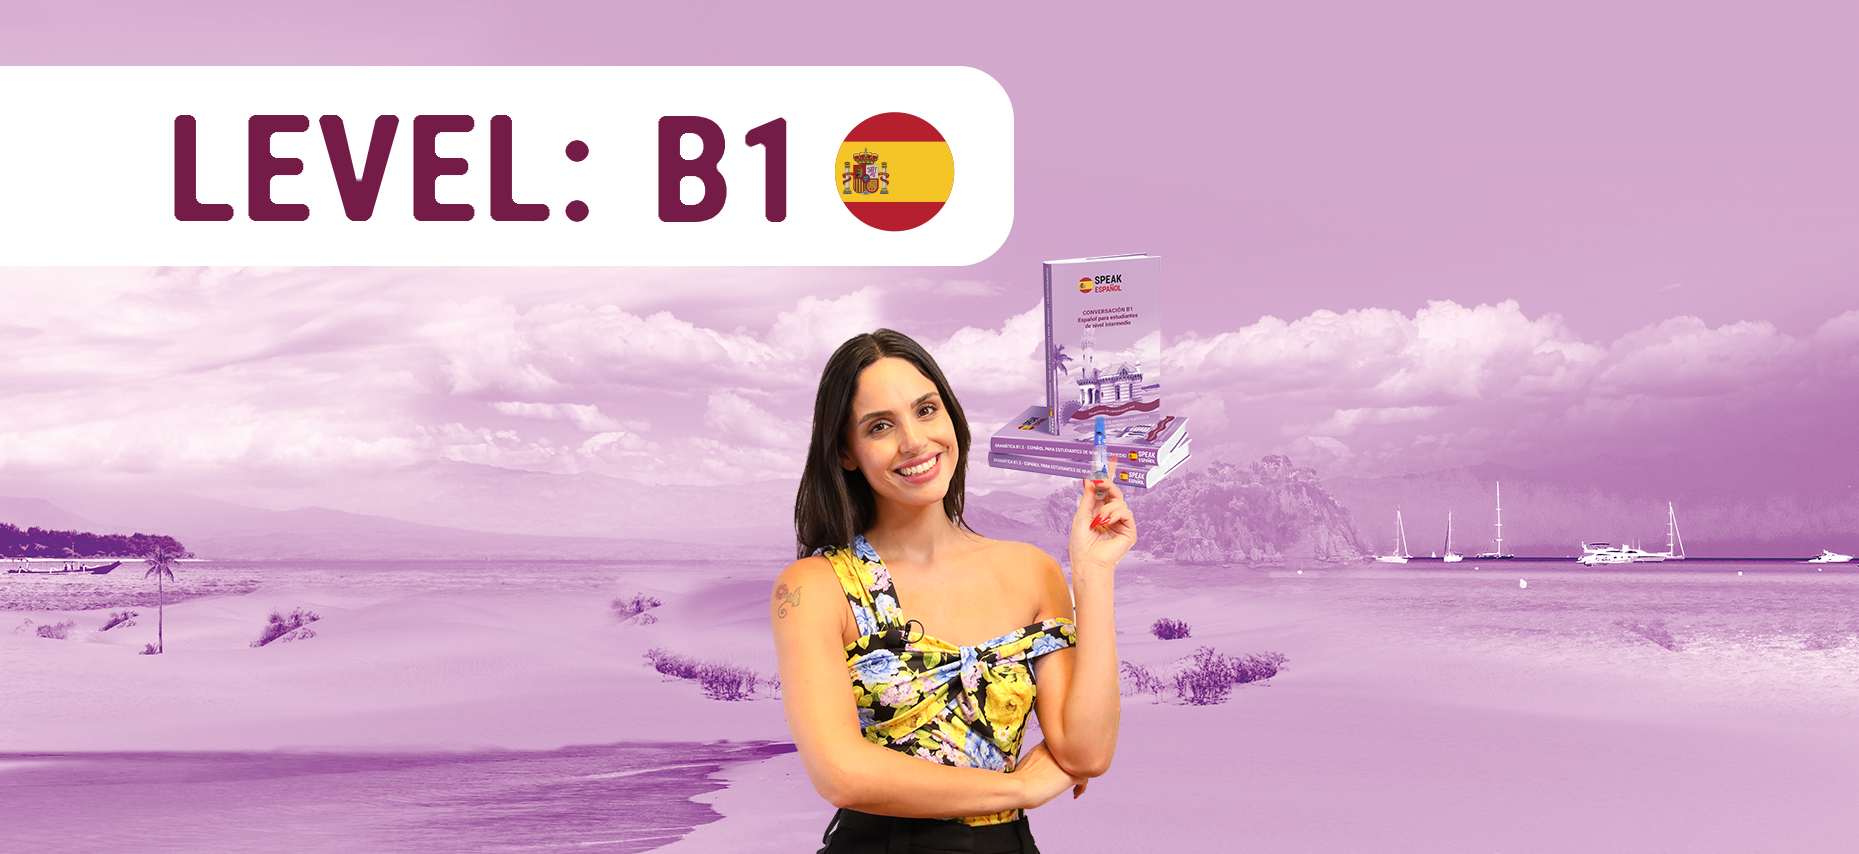 B1 level intermediate Spanish course with native teacher guidance and books included in the price